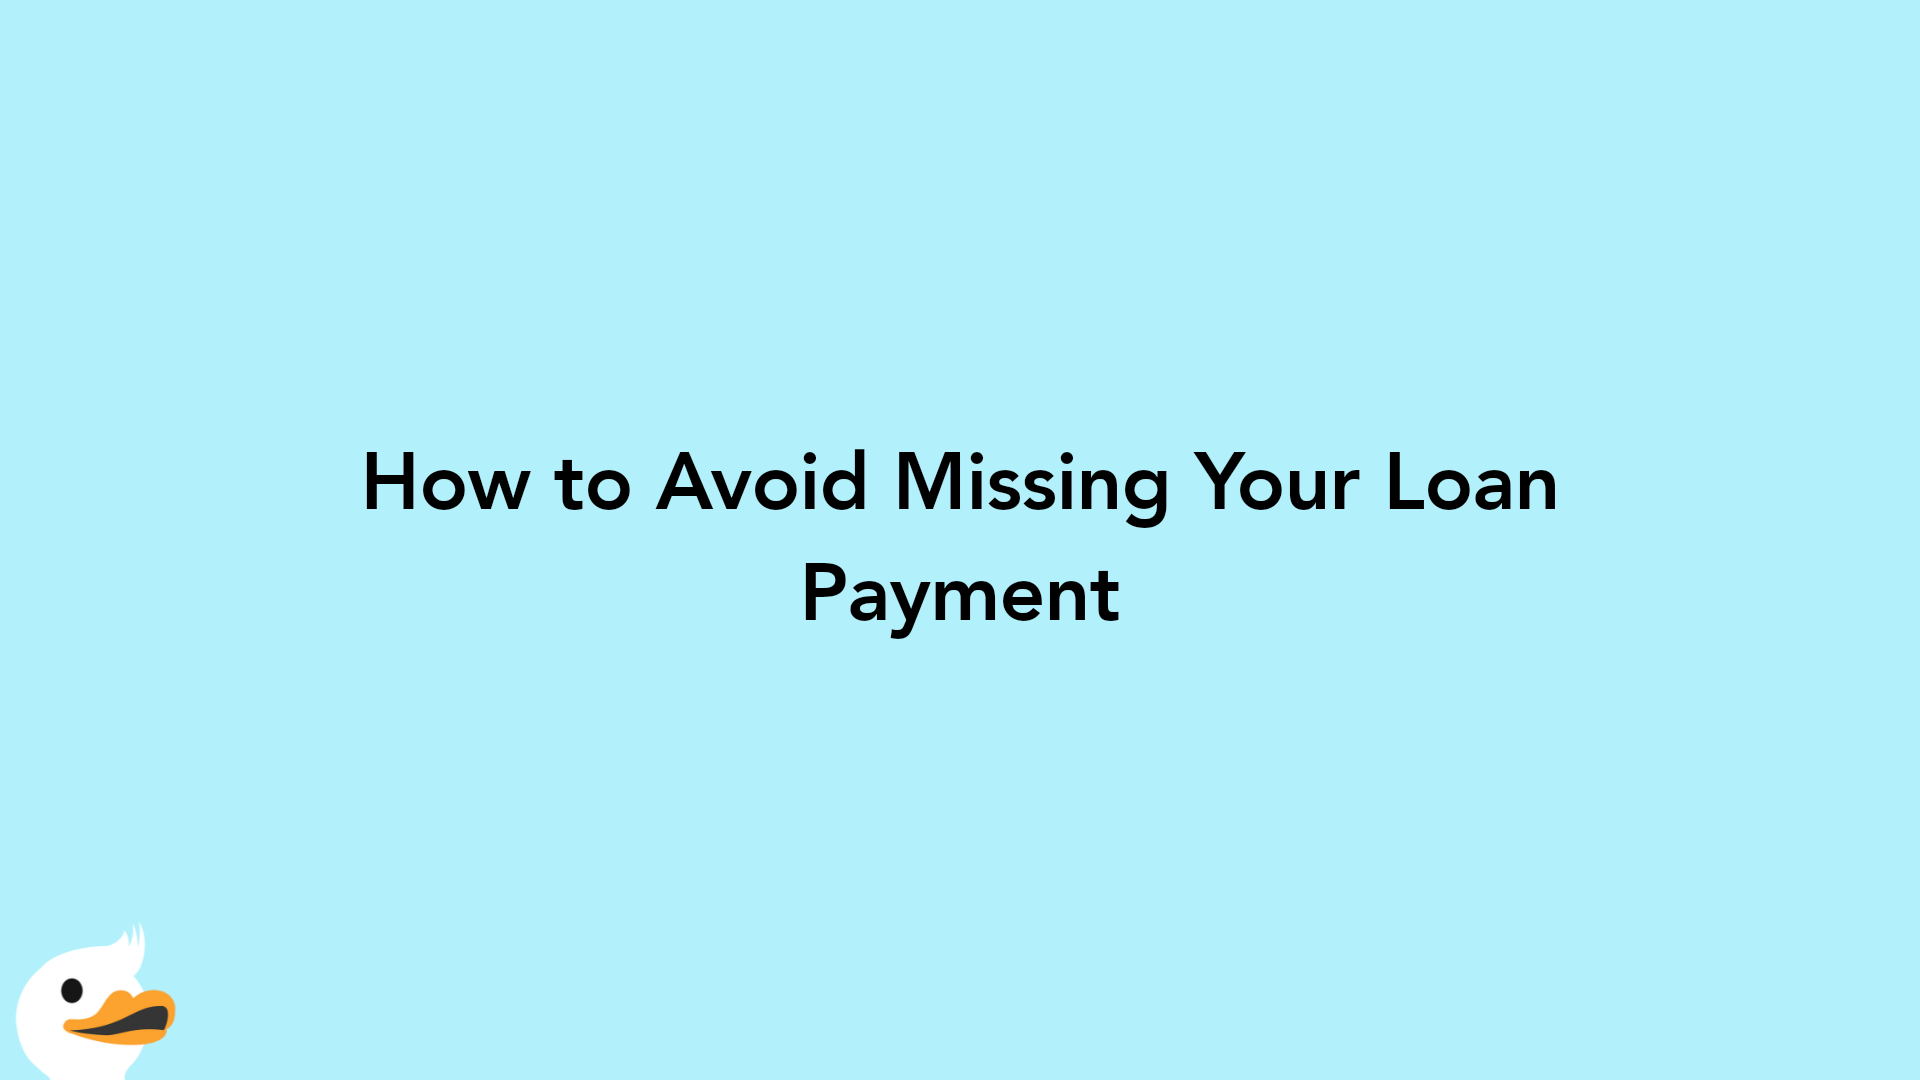 How to Avoid Missing Your Loan Payment